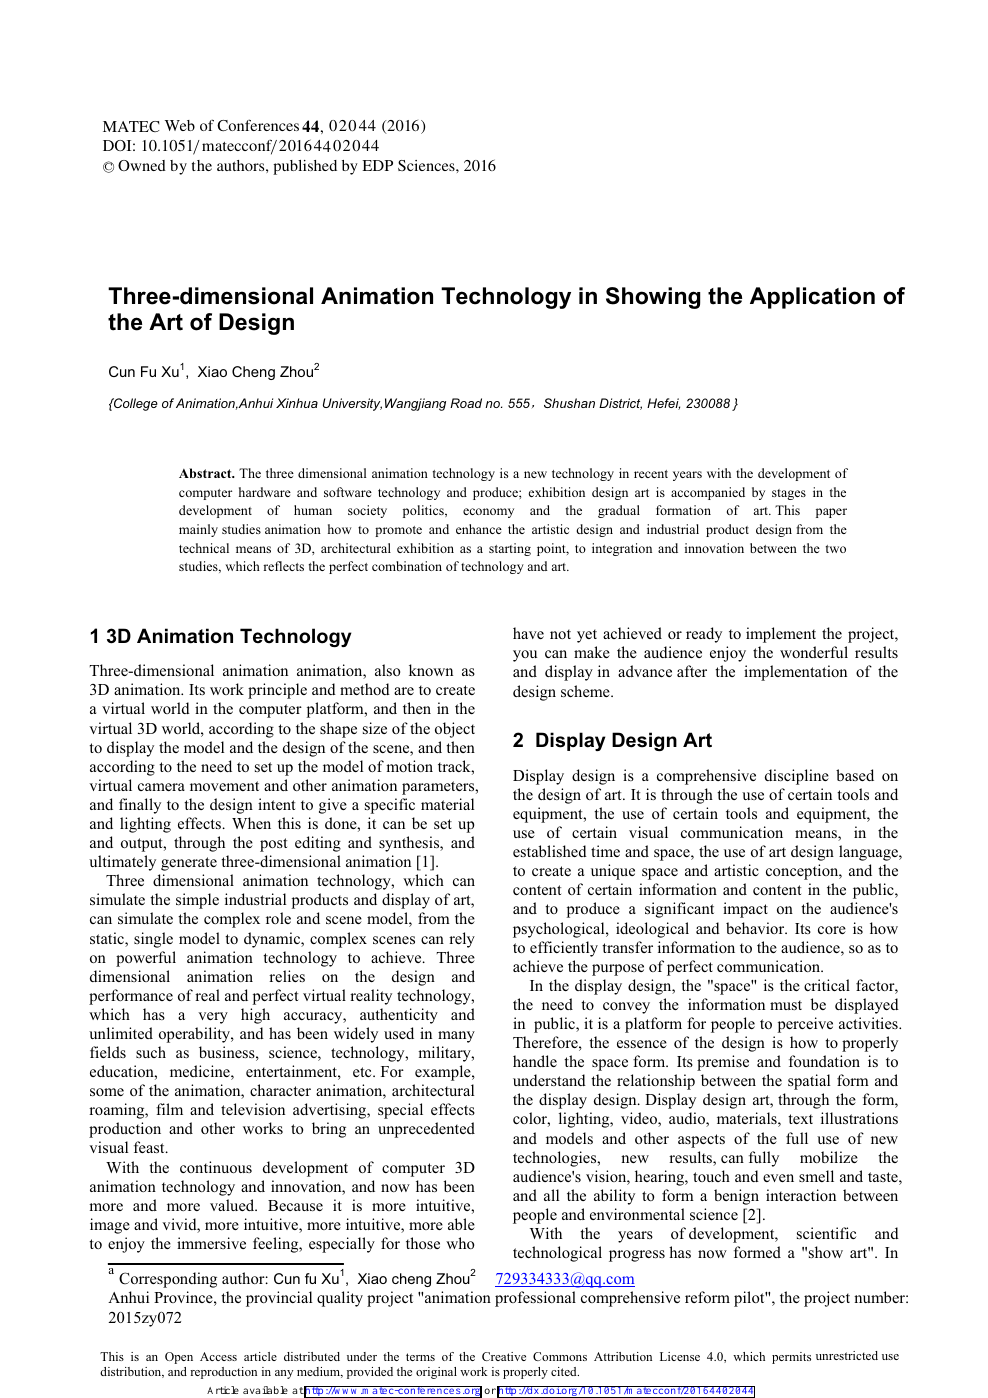 Three-dimensional Animation Technology in Showing the Application of the  Art of Design – topic of research paper in Electrical engineering,  electronic engineering, information engineering. Download scholarly article  PDF and read for free